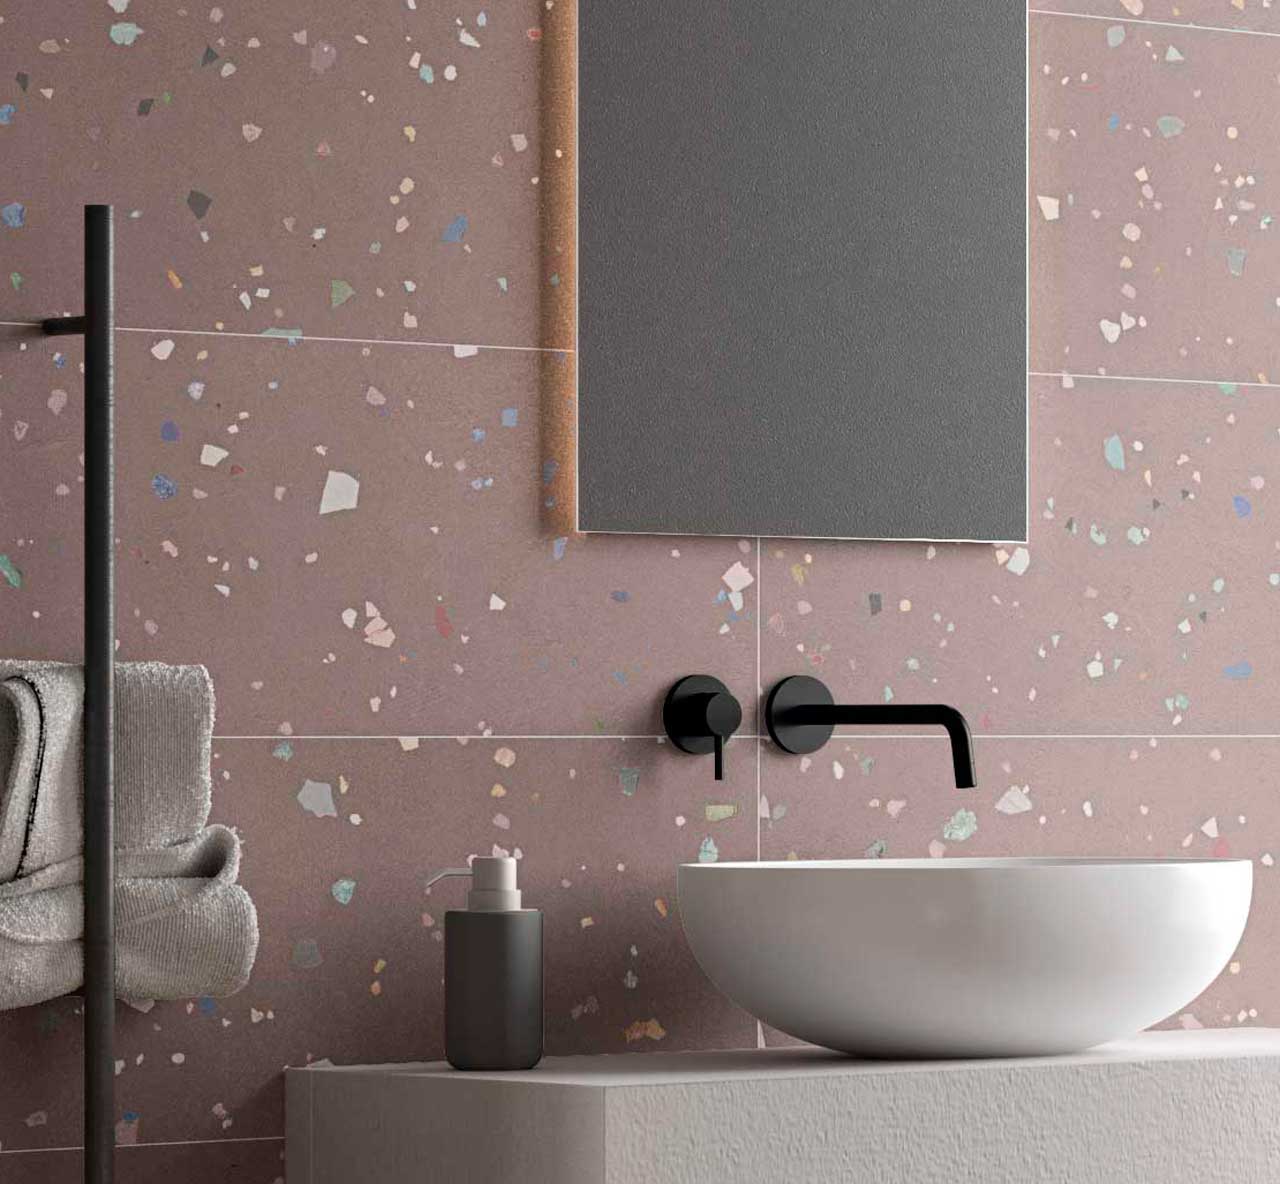 Galaxy Terrazzo Rose Wall Tiles used as stunning speckled pink wall tiles in a bathroom